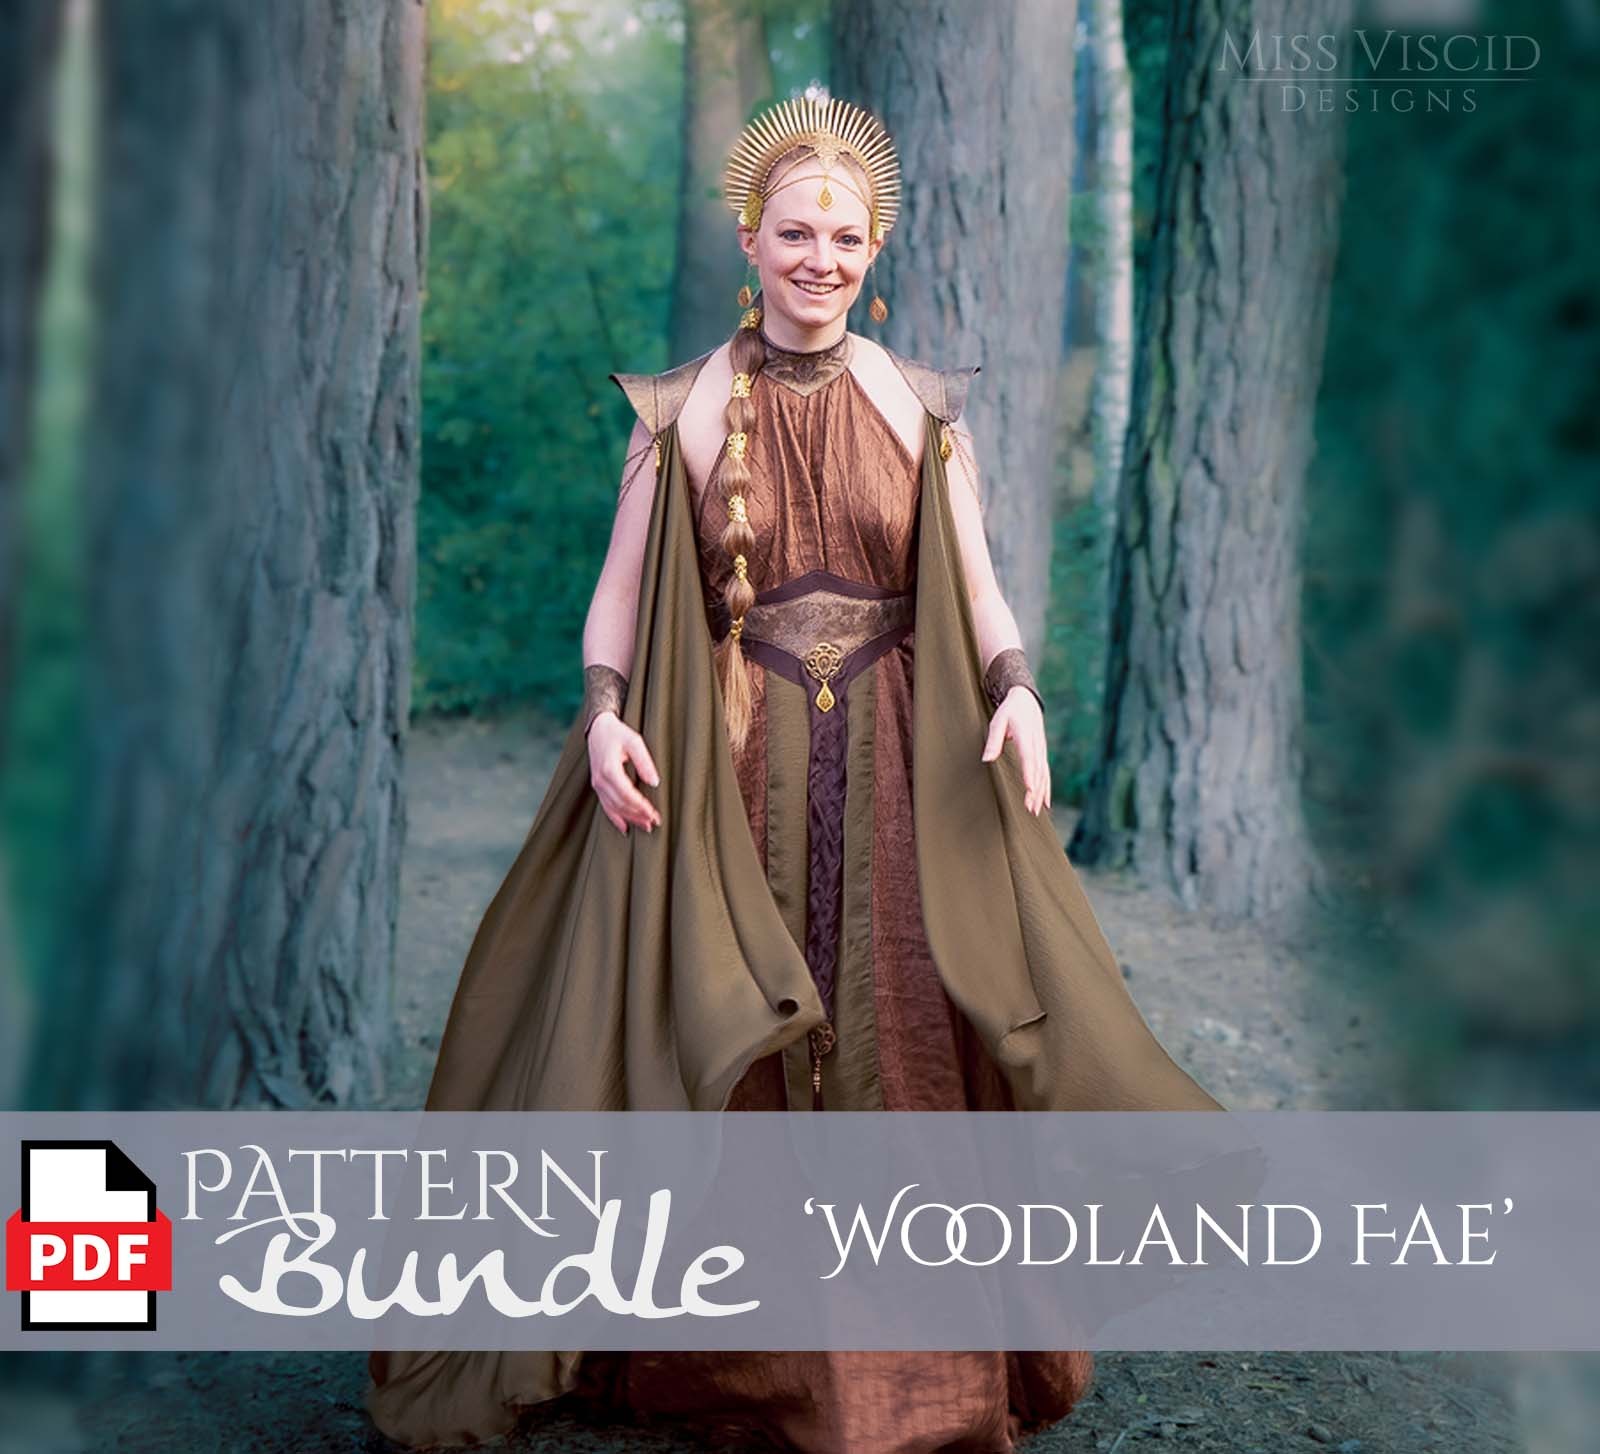 WOODLAND FAE - PDF pattern bundle with sewing guides